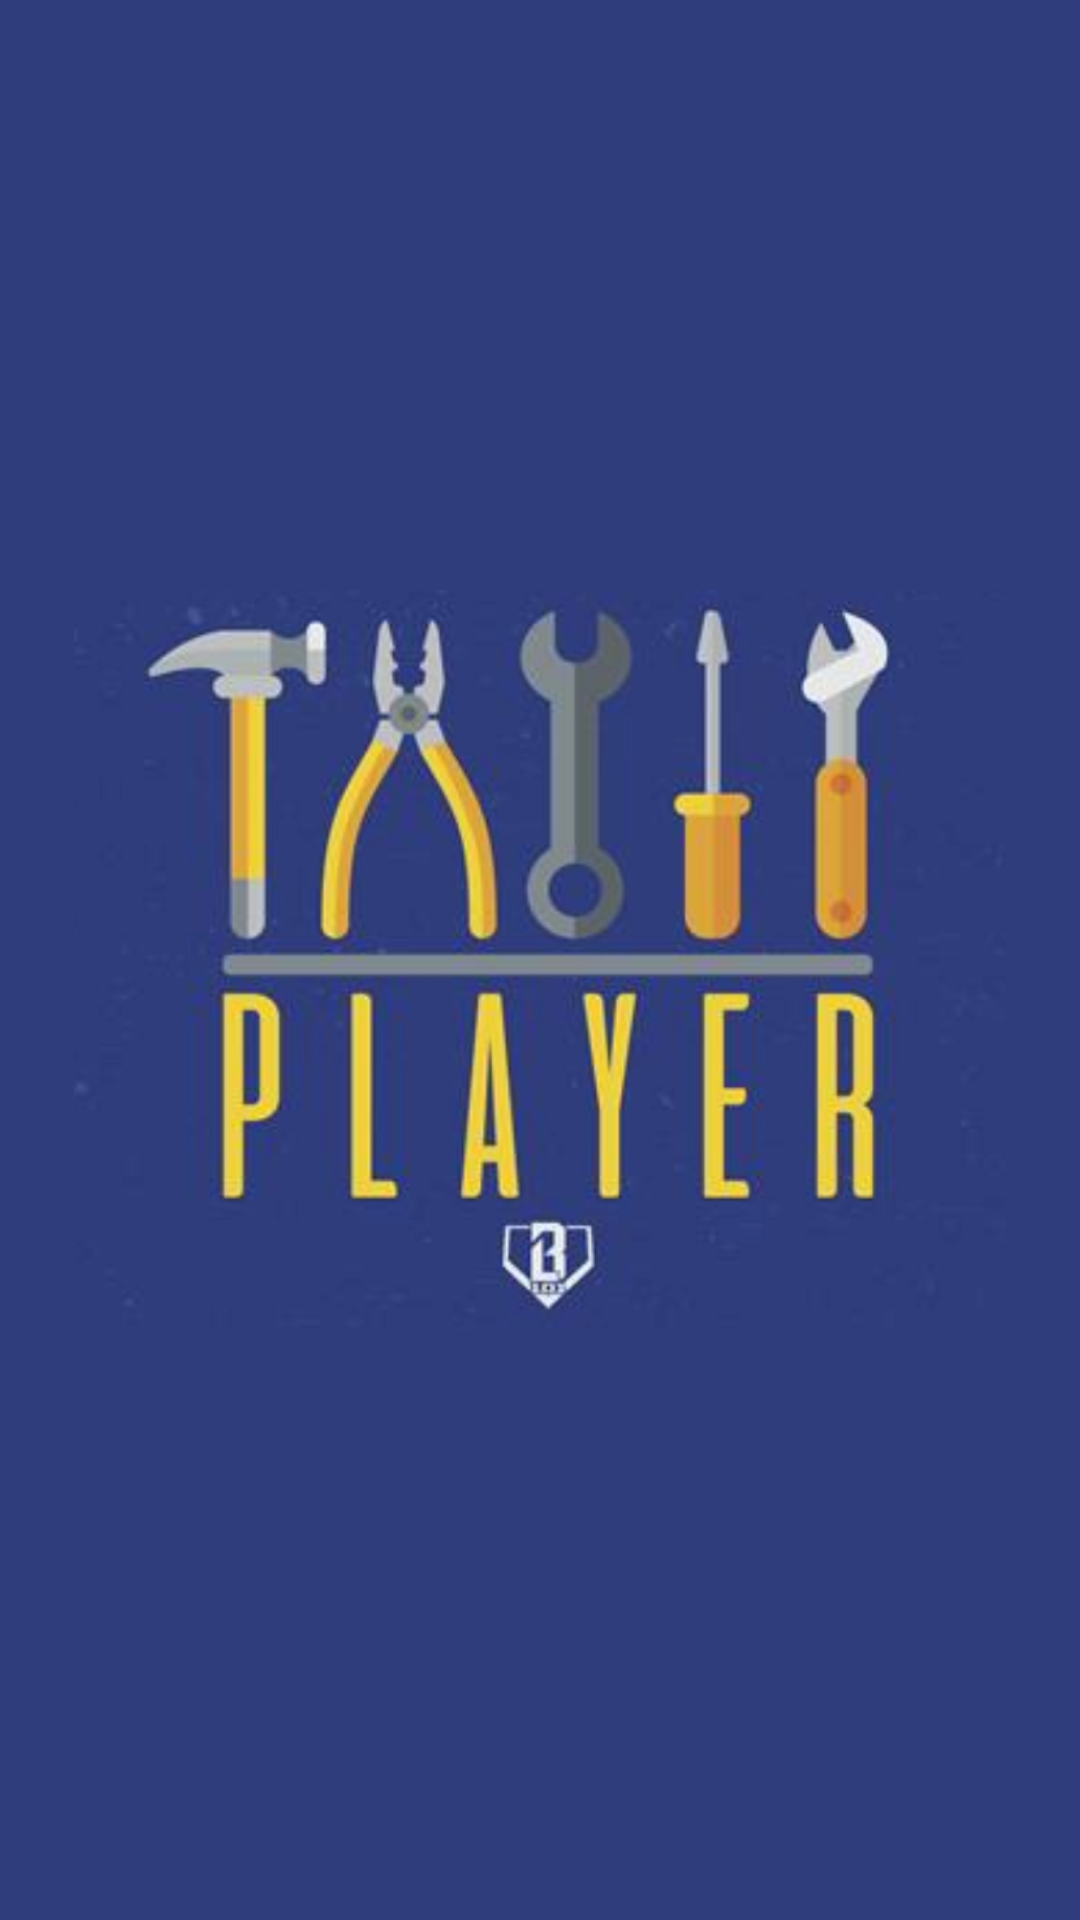 Wallpaper Wednesday - Five Tool Player